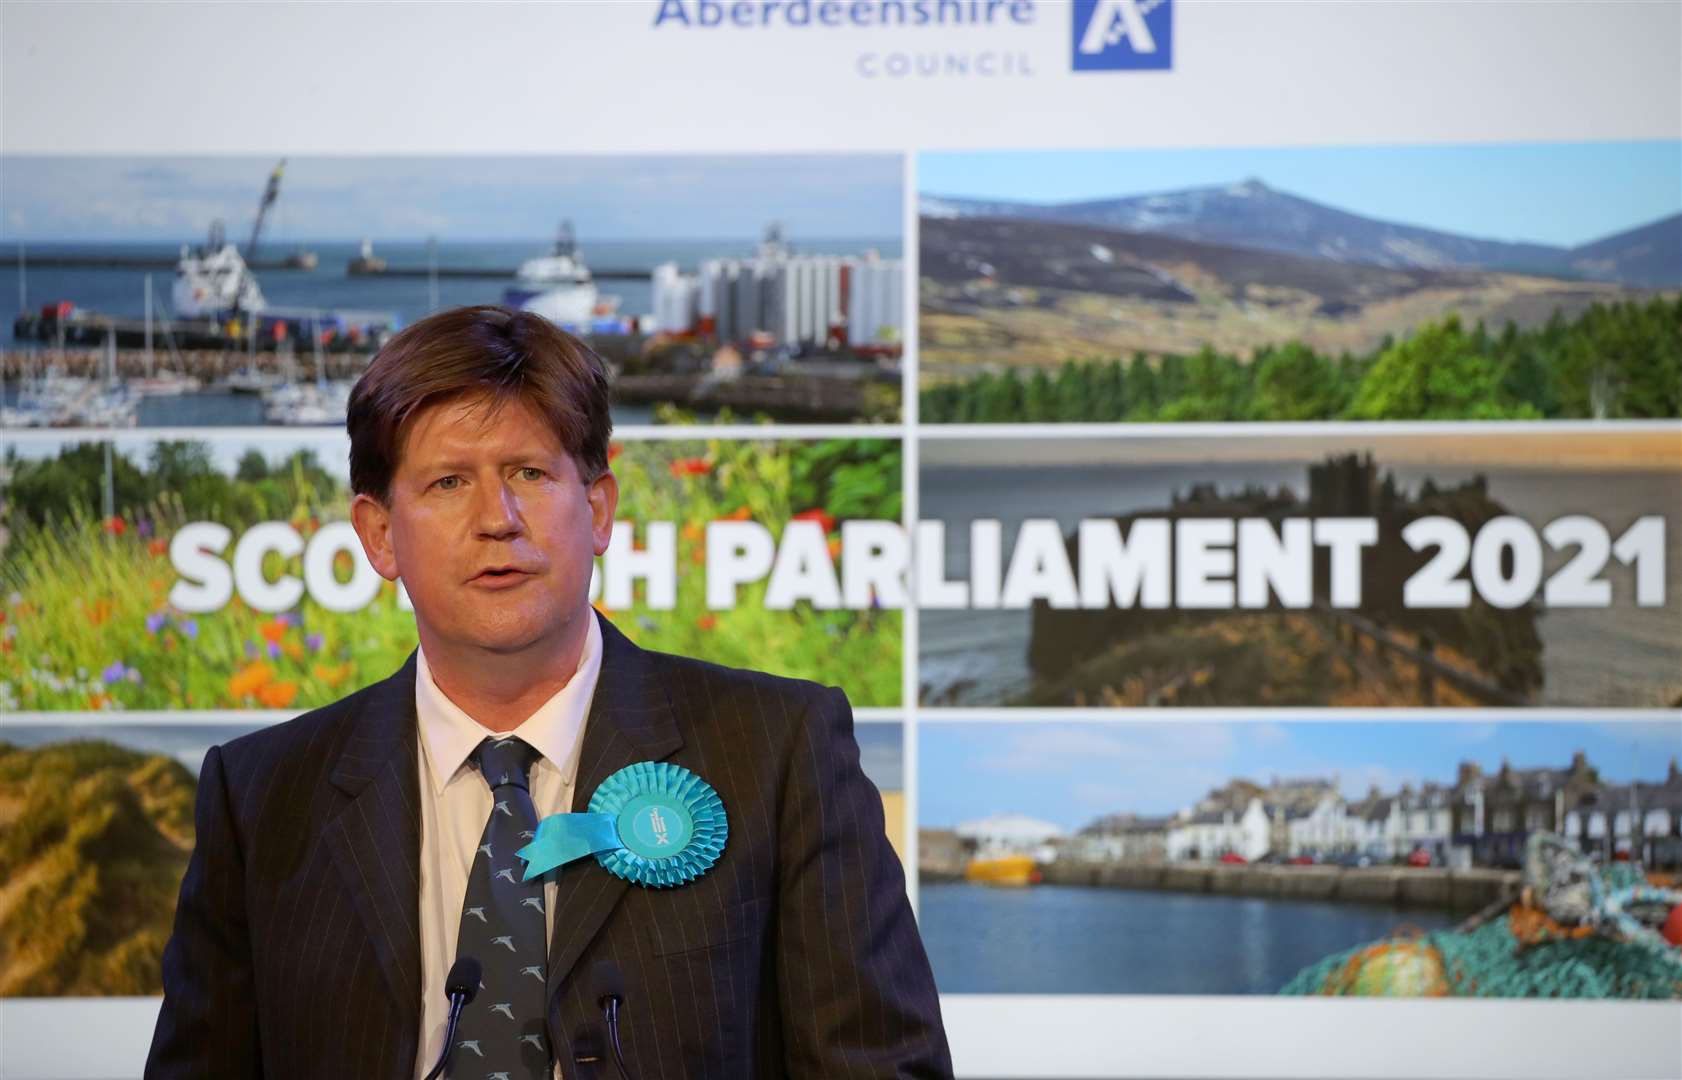 Scottish Conservative chief whip Alexander Burnett branded the bid to cancel FMQs as being ‘unprecedented and unacceptable’ (Andrew Milligan/PA)